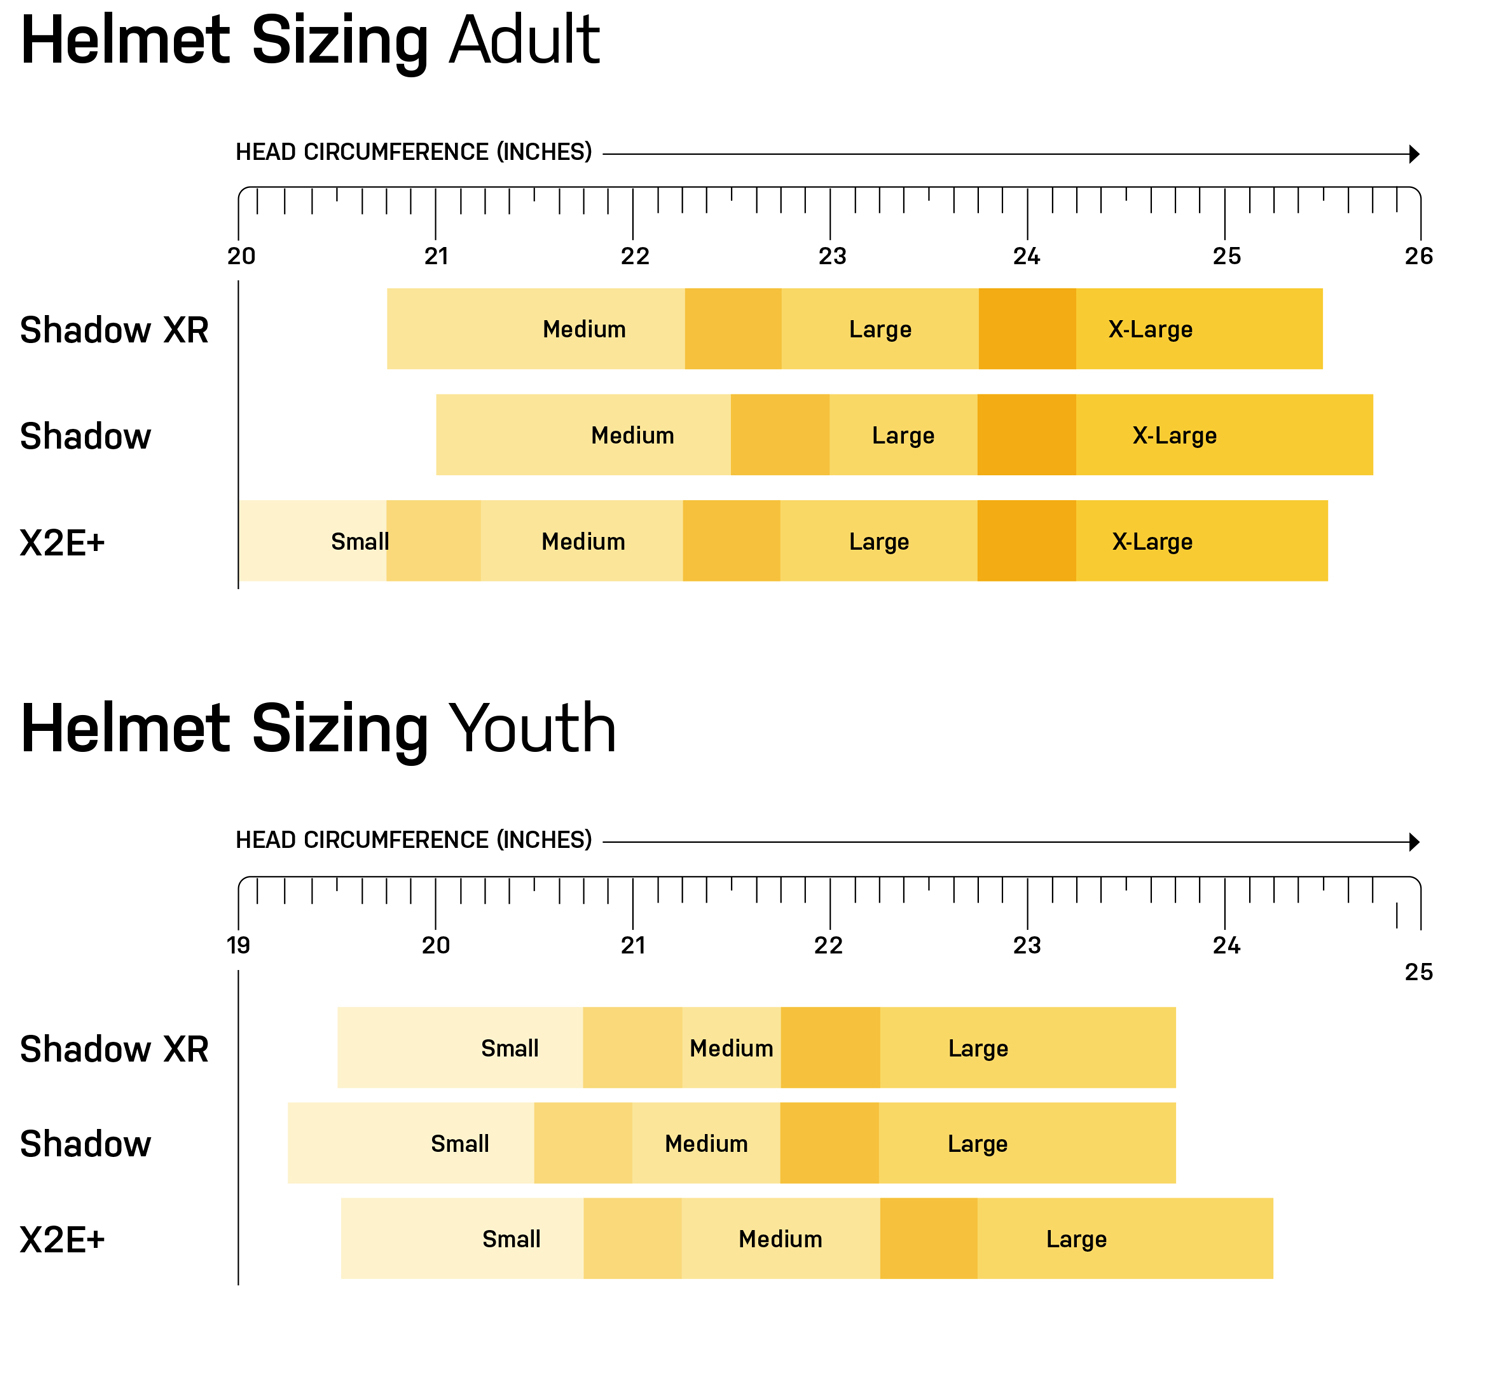 Xenith helmets sizing chart. Click this link for a text based helmet chart https://xenith.com/documents/Hosting/Helmet-Sizing-Chart-Sheet1.pdf